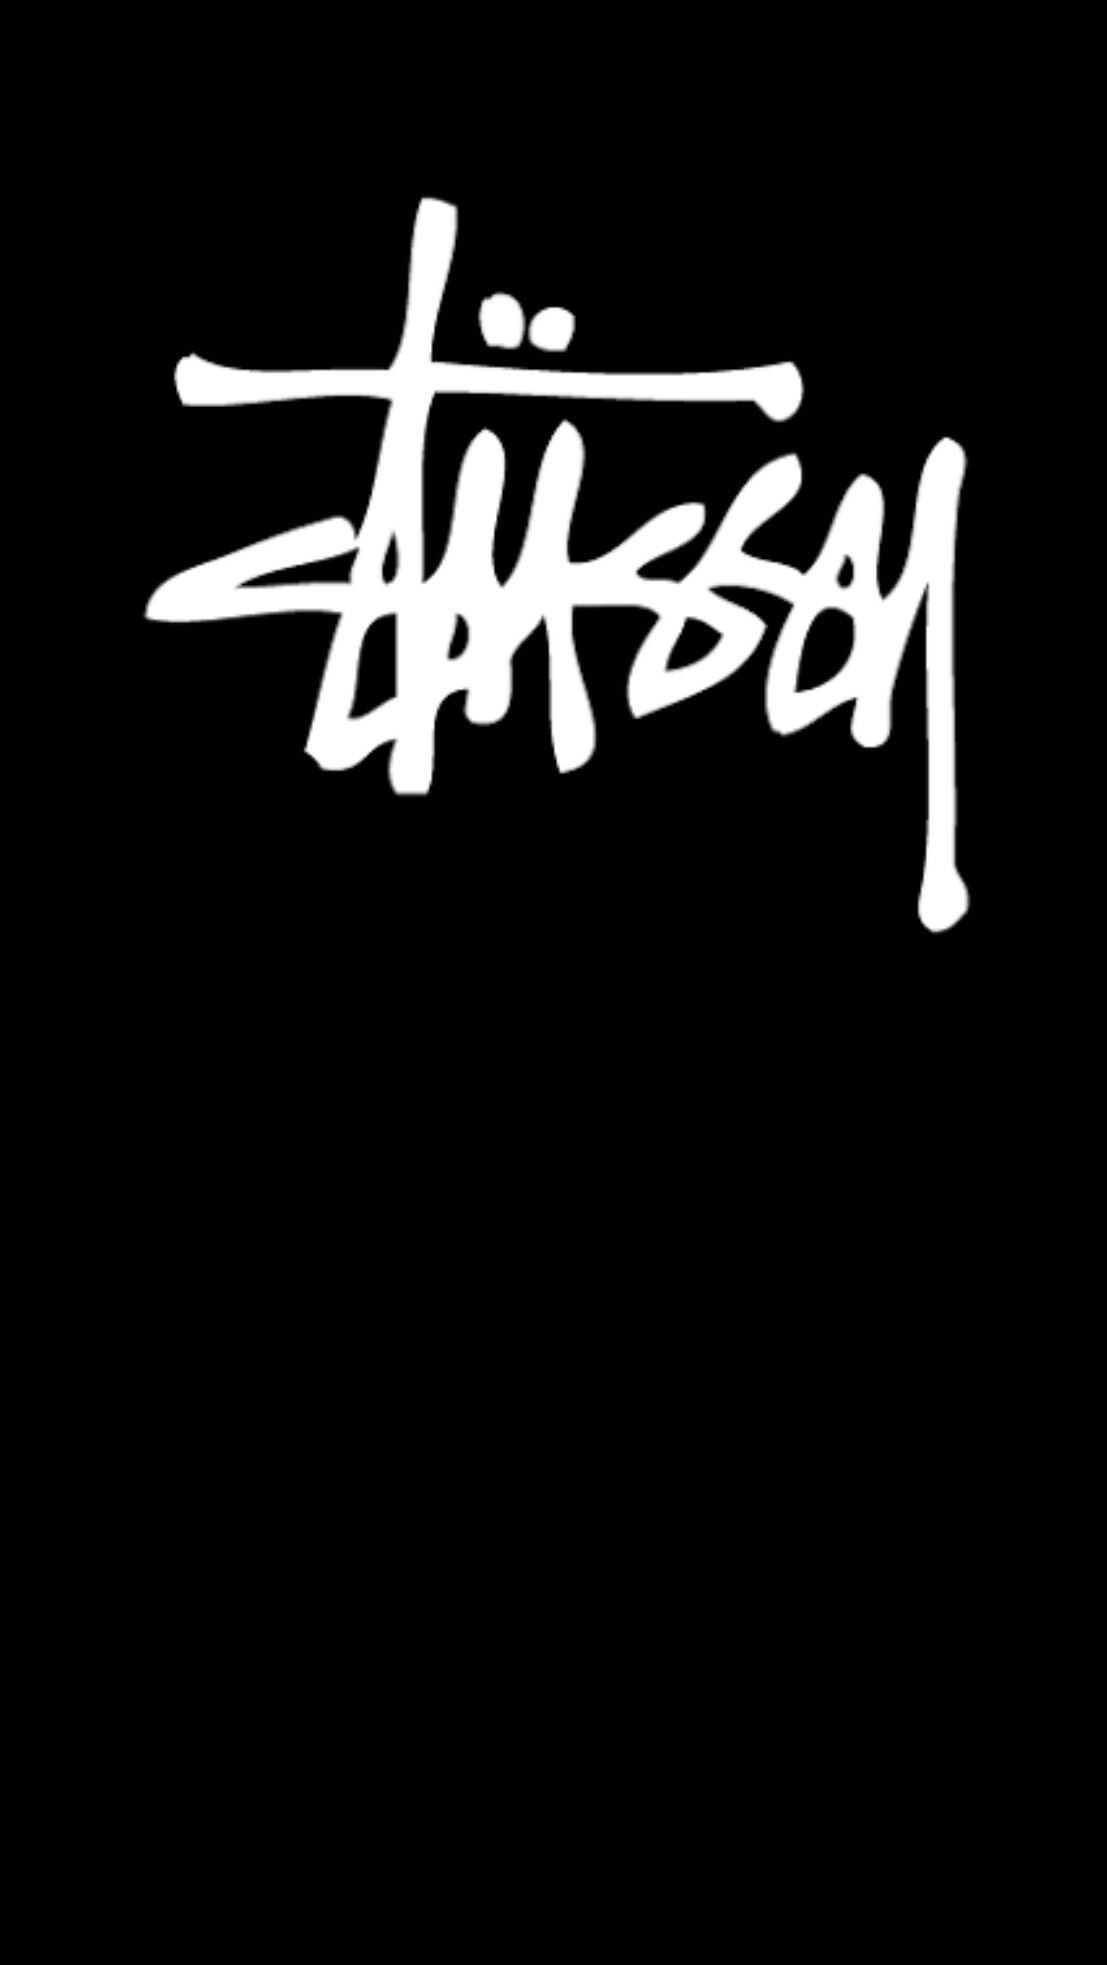 #stussy #black #wallpaper #android #iphone